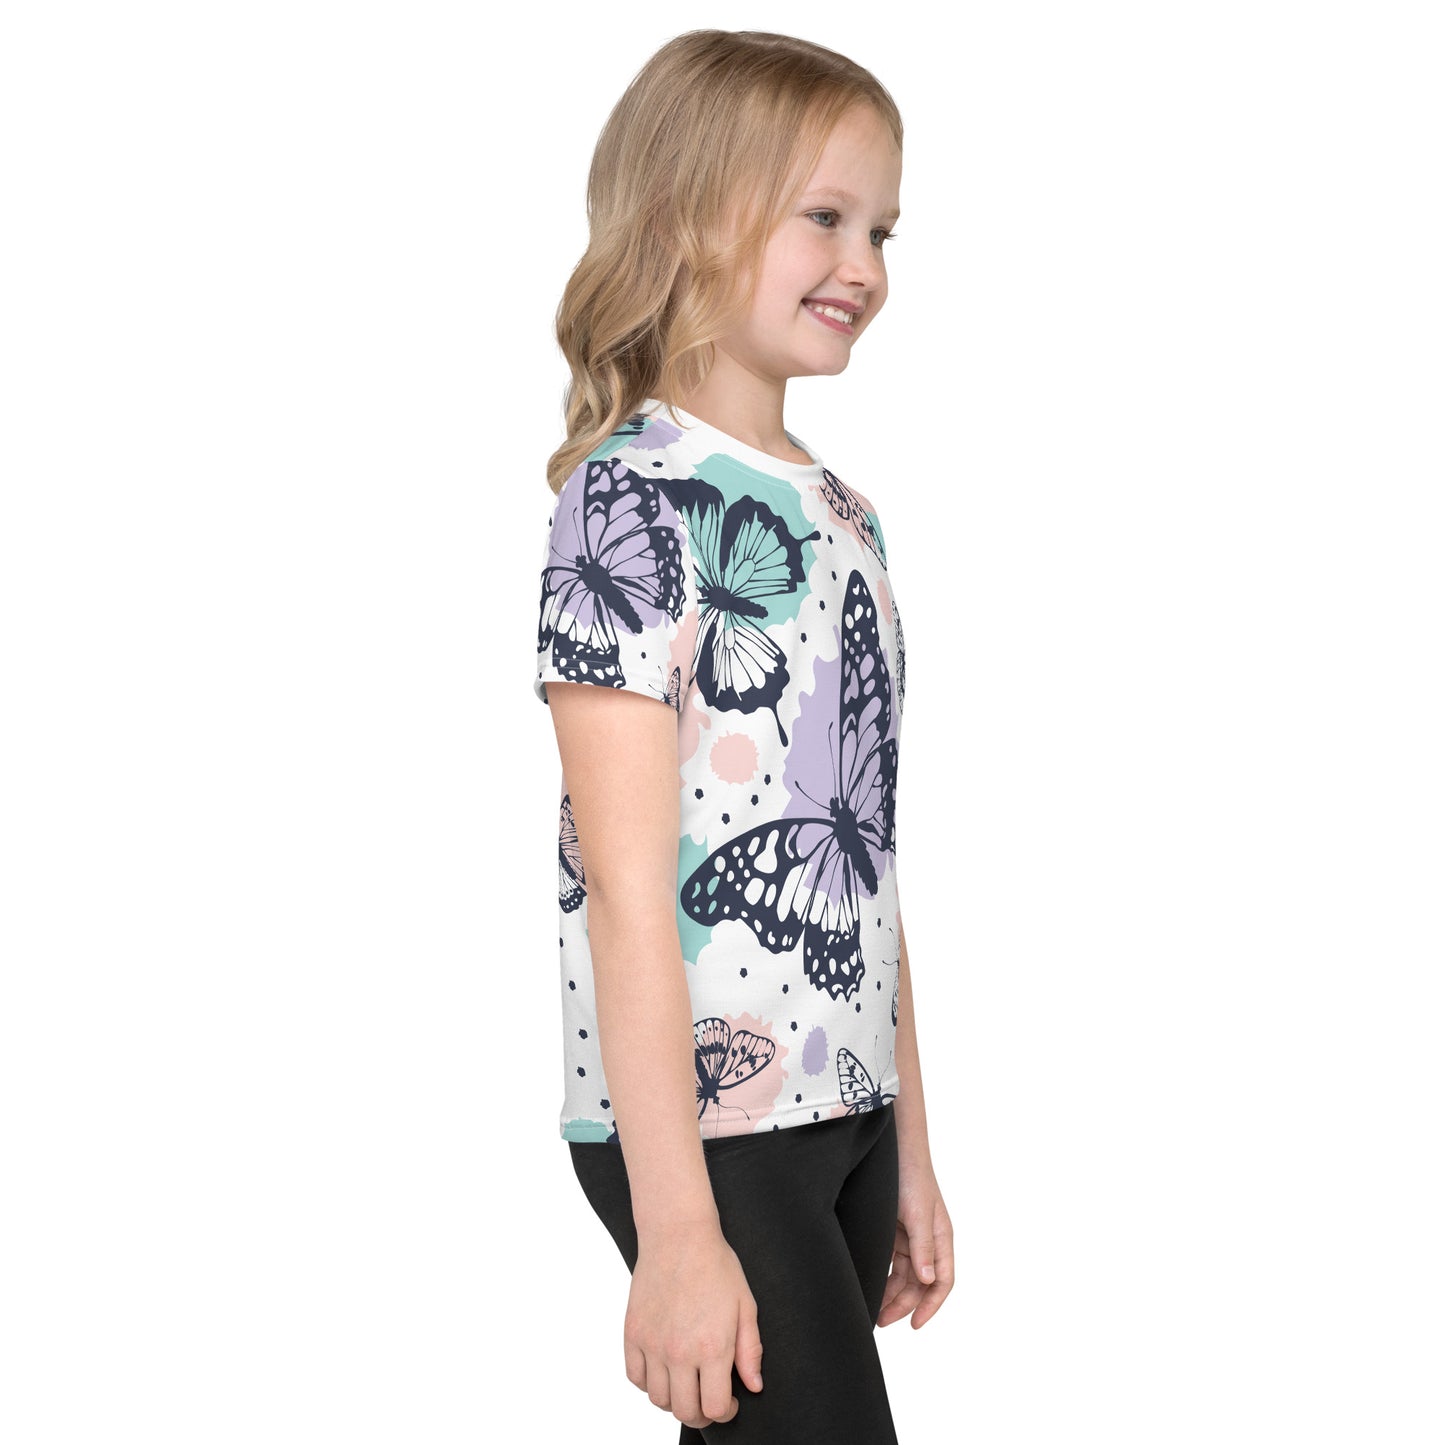 Butterflies - Sustainably Made Kids T-Shirt